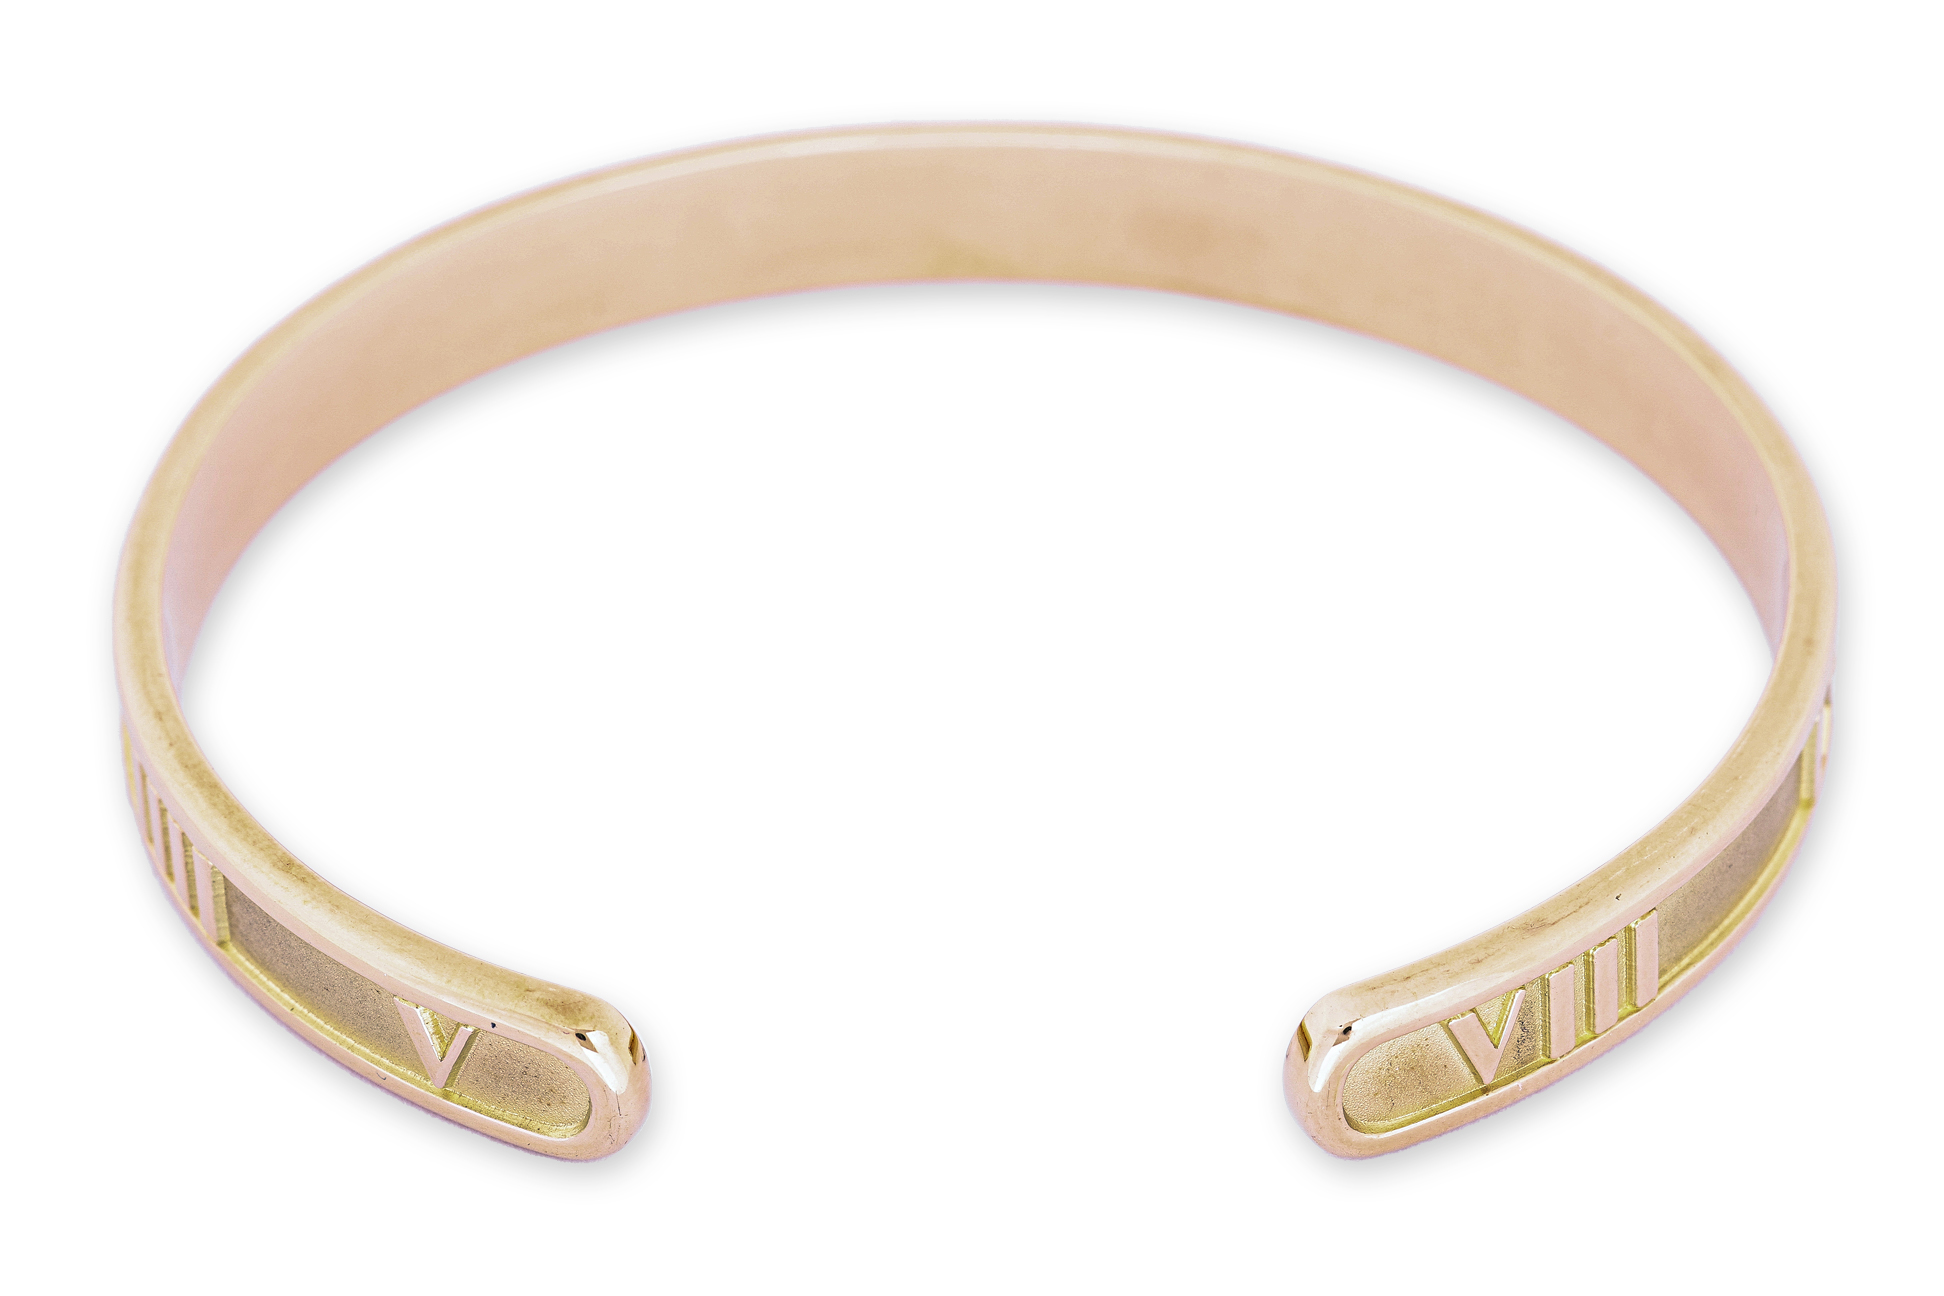 AN 'ATLAS' CUFF BANGLE BY TIFFANY & CO. - Image 2 of 6